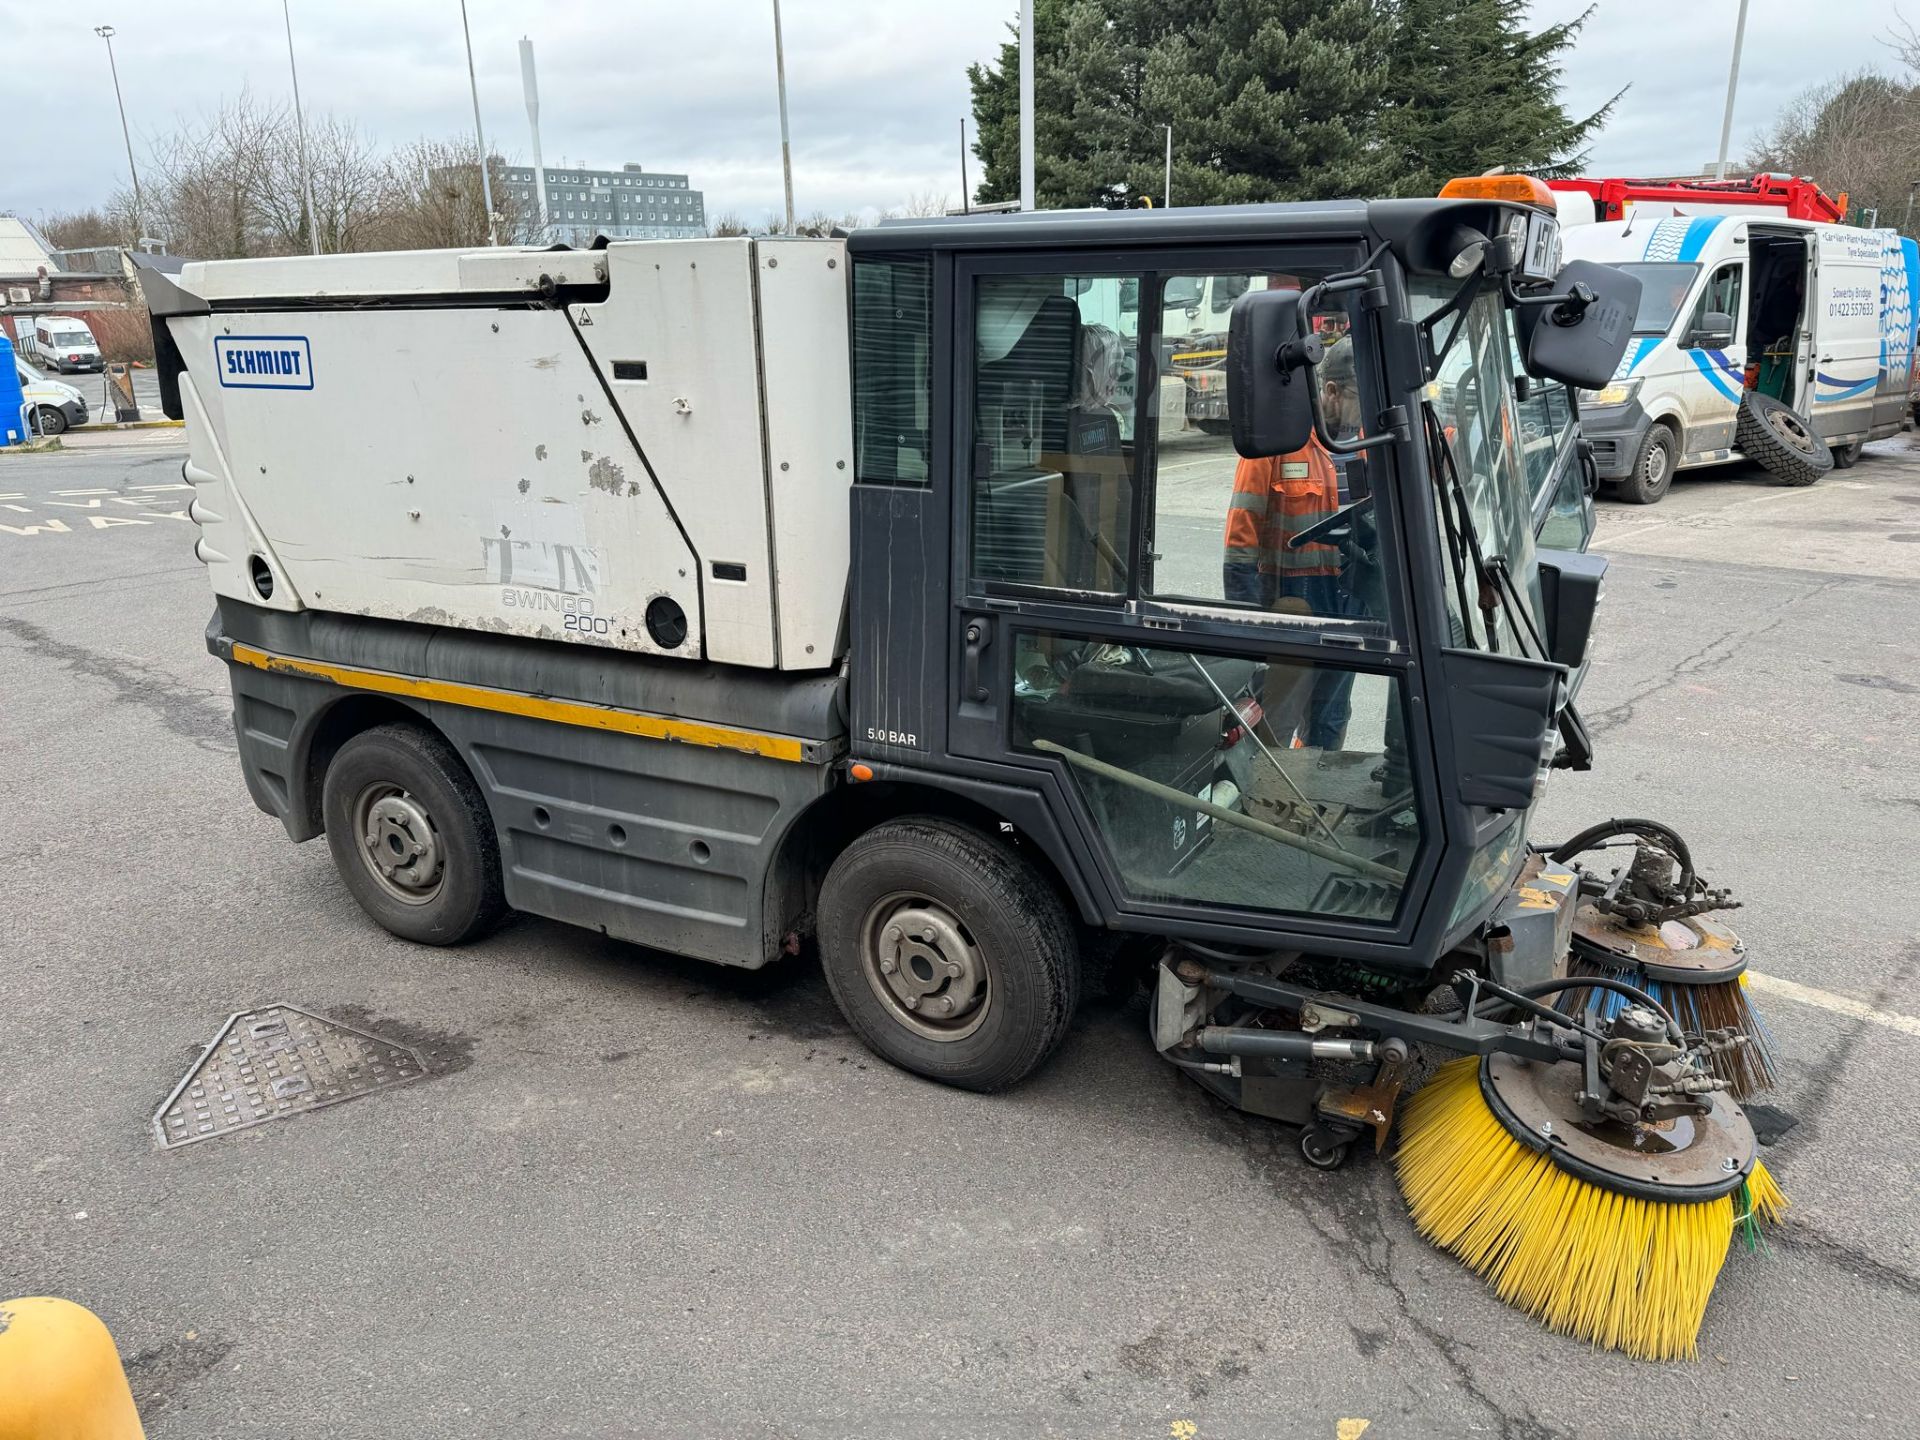 2017, SCHMIDT - Compact Road Sweeper (Ex-Council fleet owned and maintained)